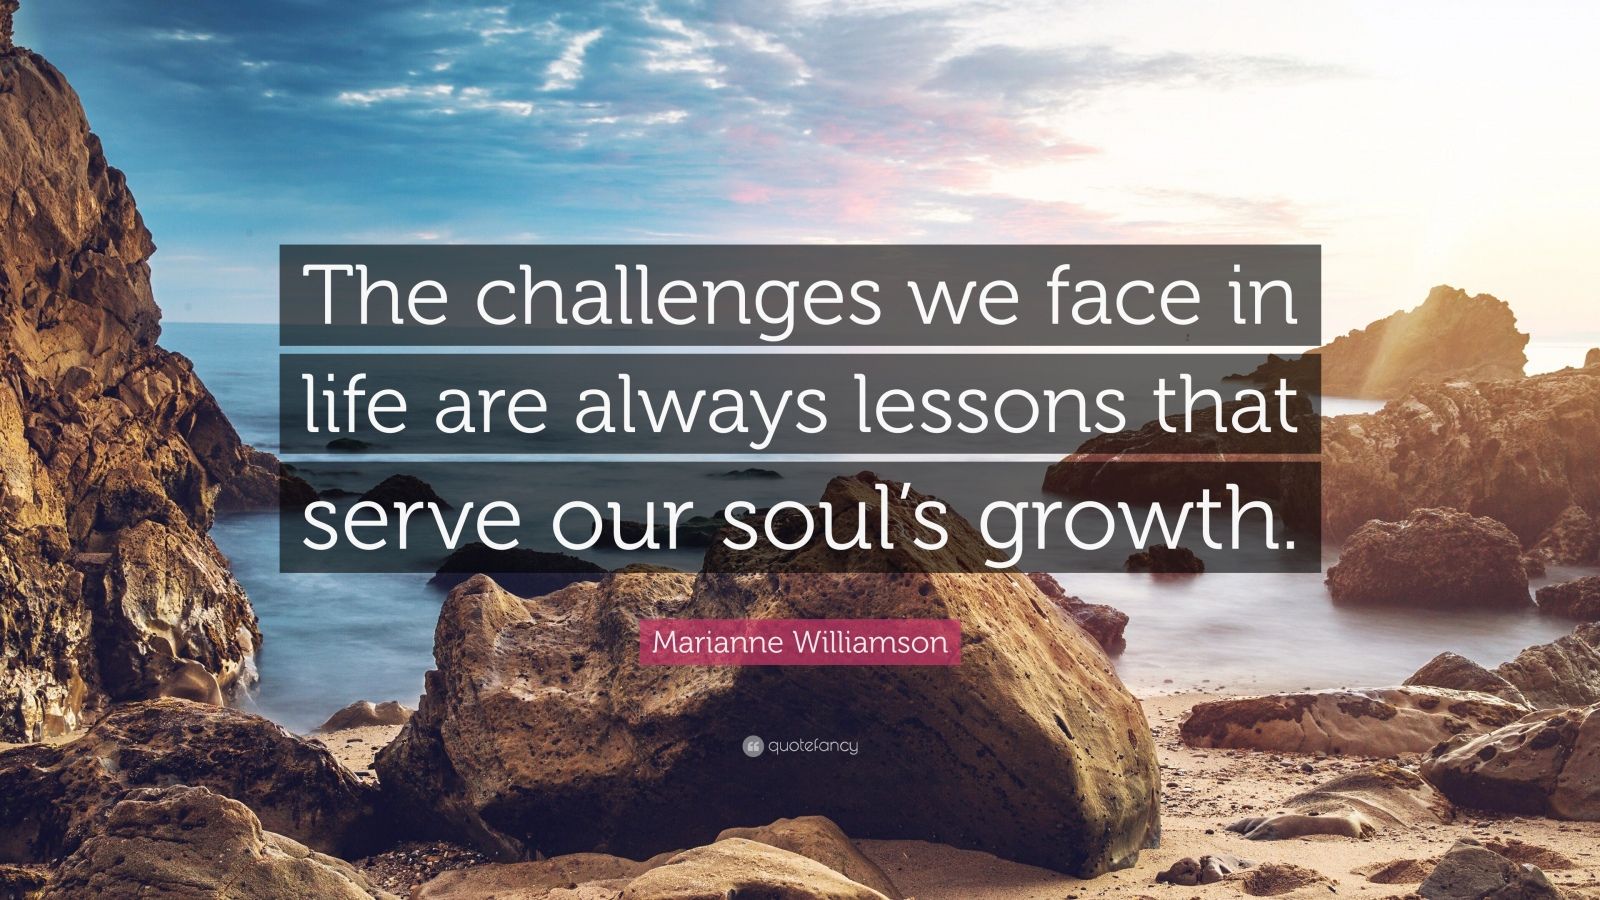 Marianne Williamson Quote: “The challenges we face in life are always ...